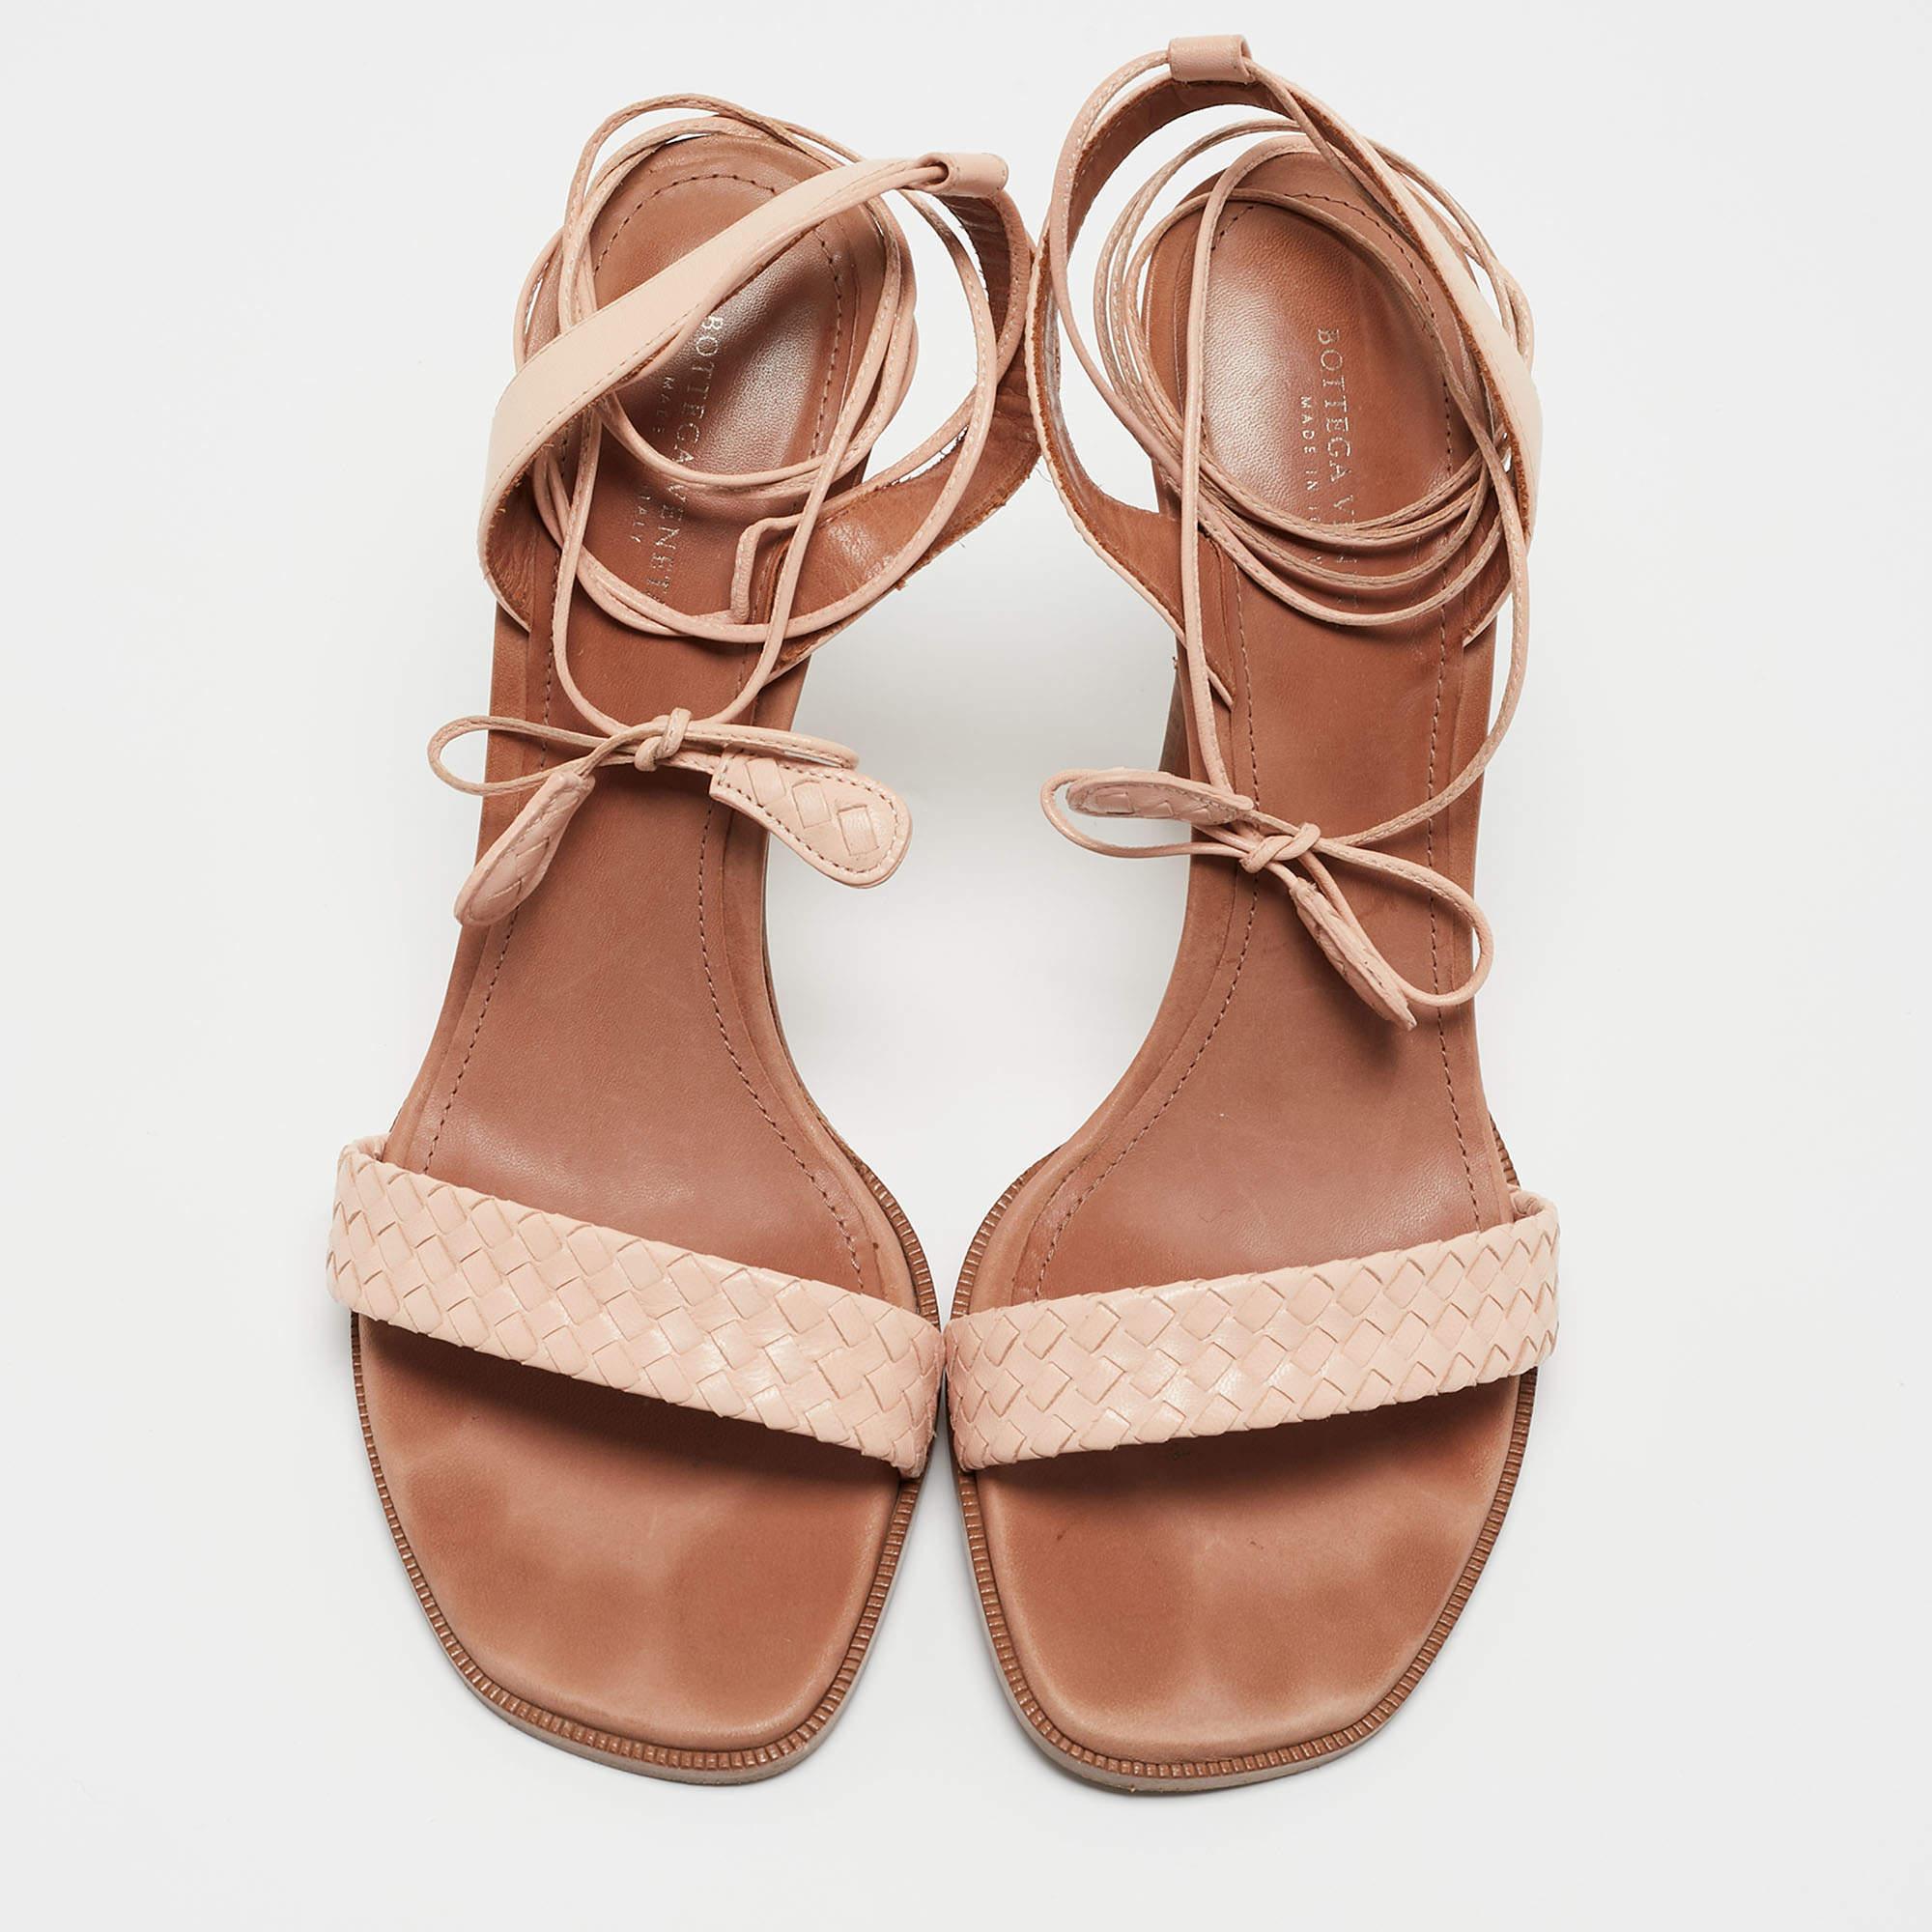 These sandals will offer you both luxury and comfort. Made from quality materials, they come in a versatile shade and are equipped with comfortable insoles.

Includes: Original Dustbag, Original Box

